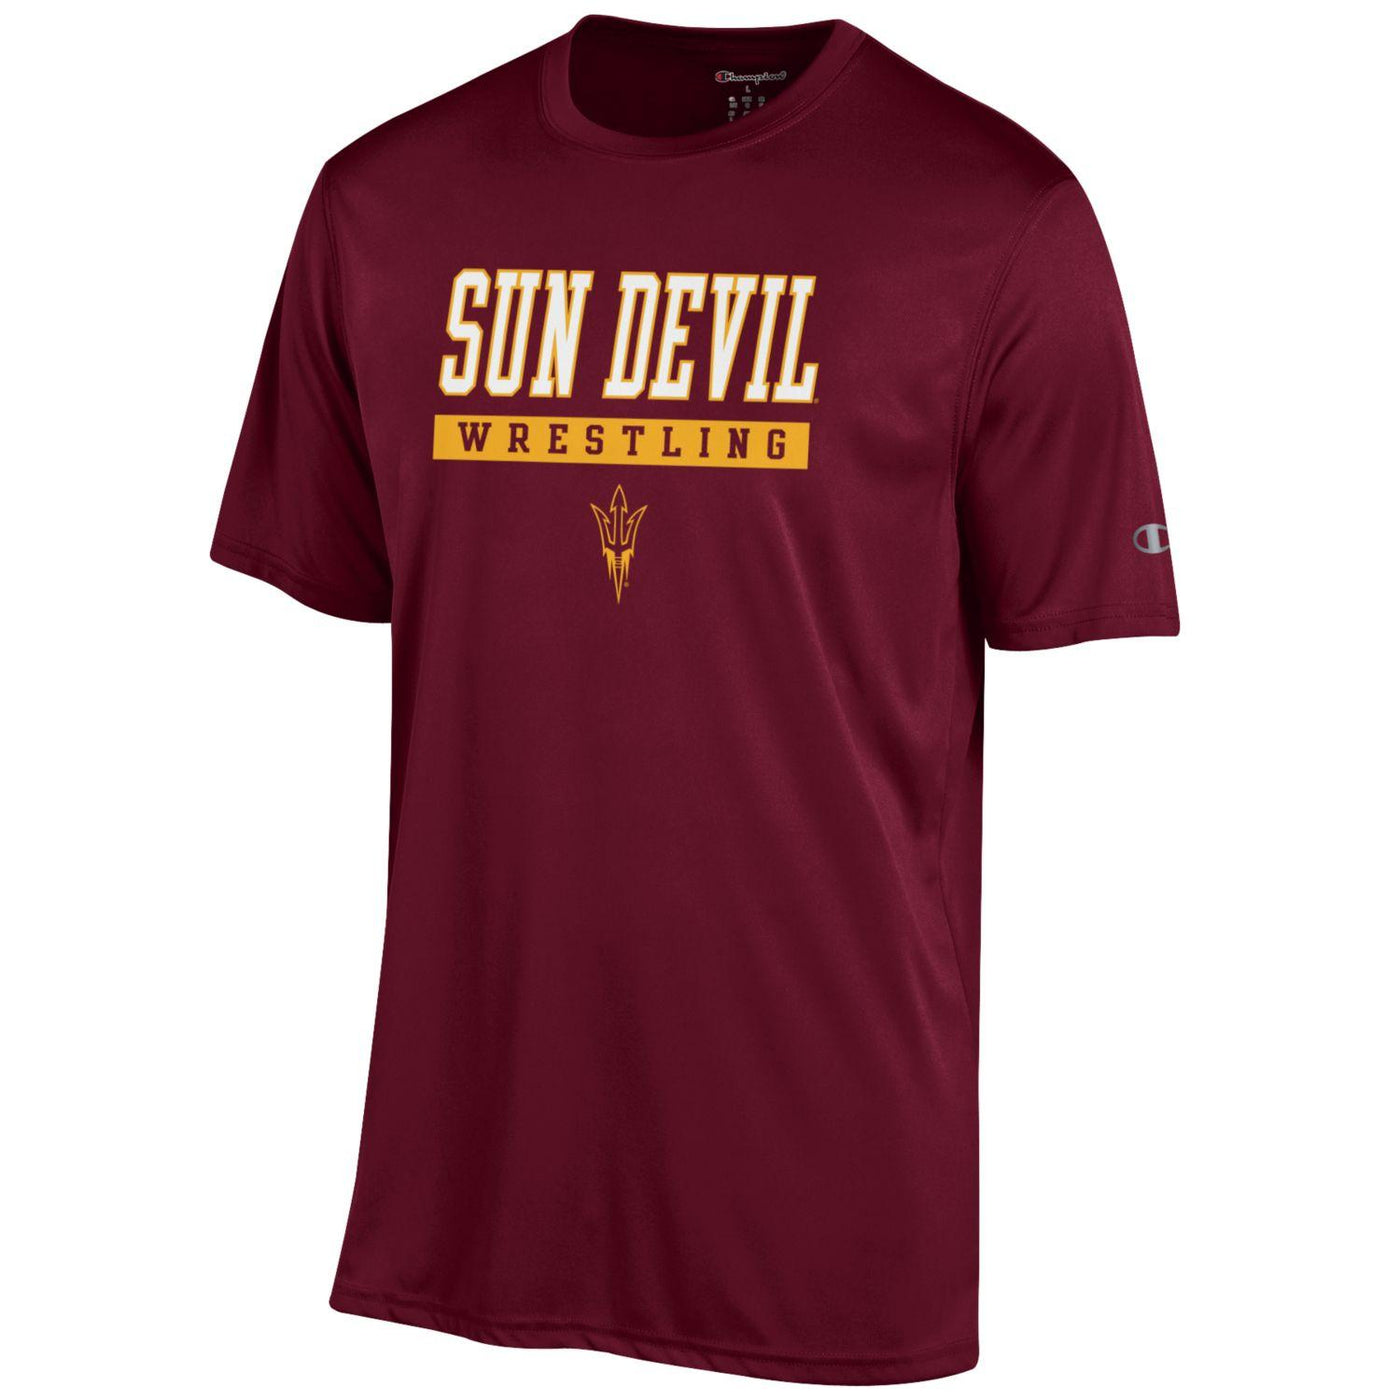 ASU maroon tee with Sun Devil Wrestling printed across chest above small gold pitchfork.